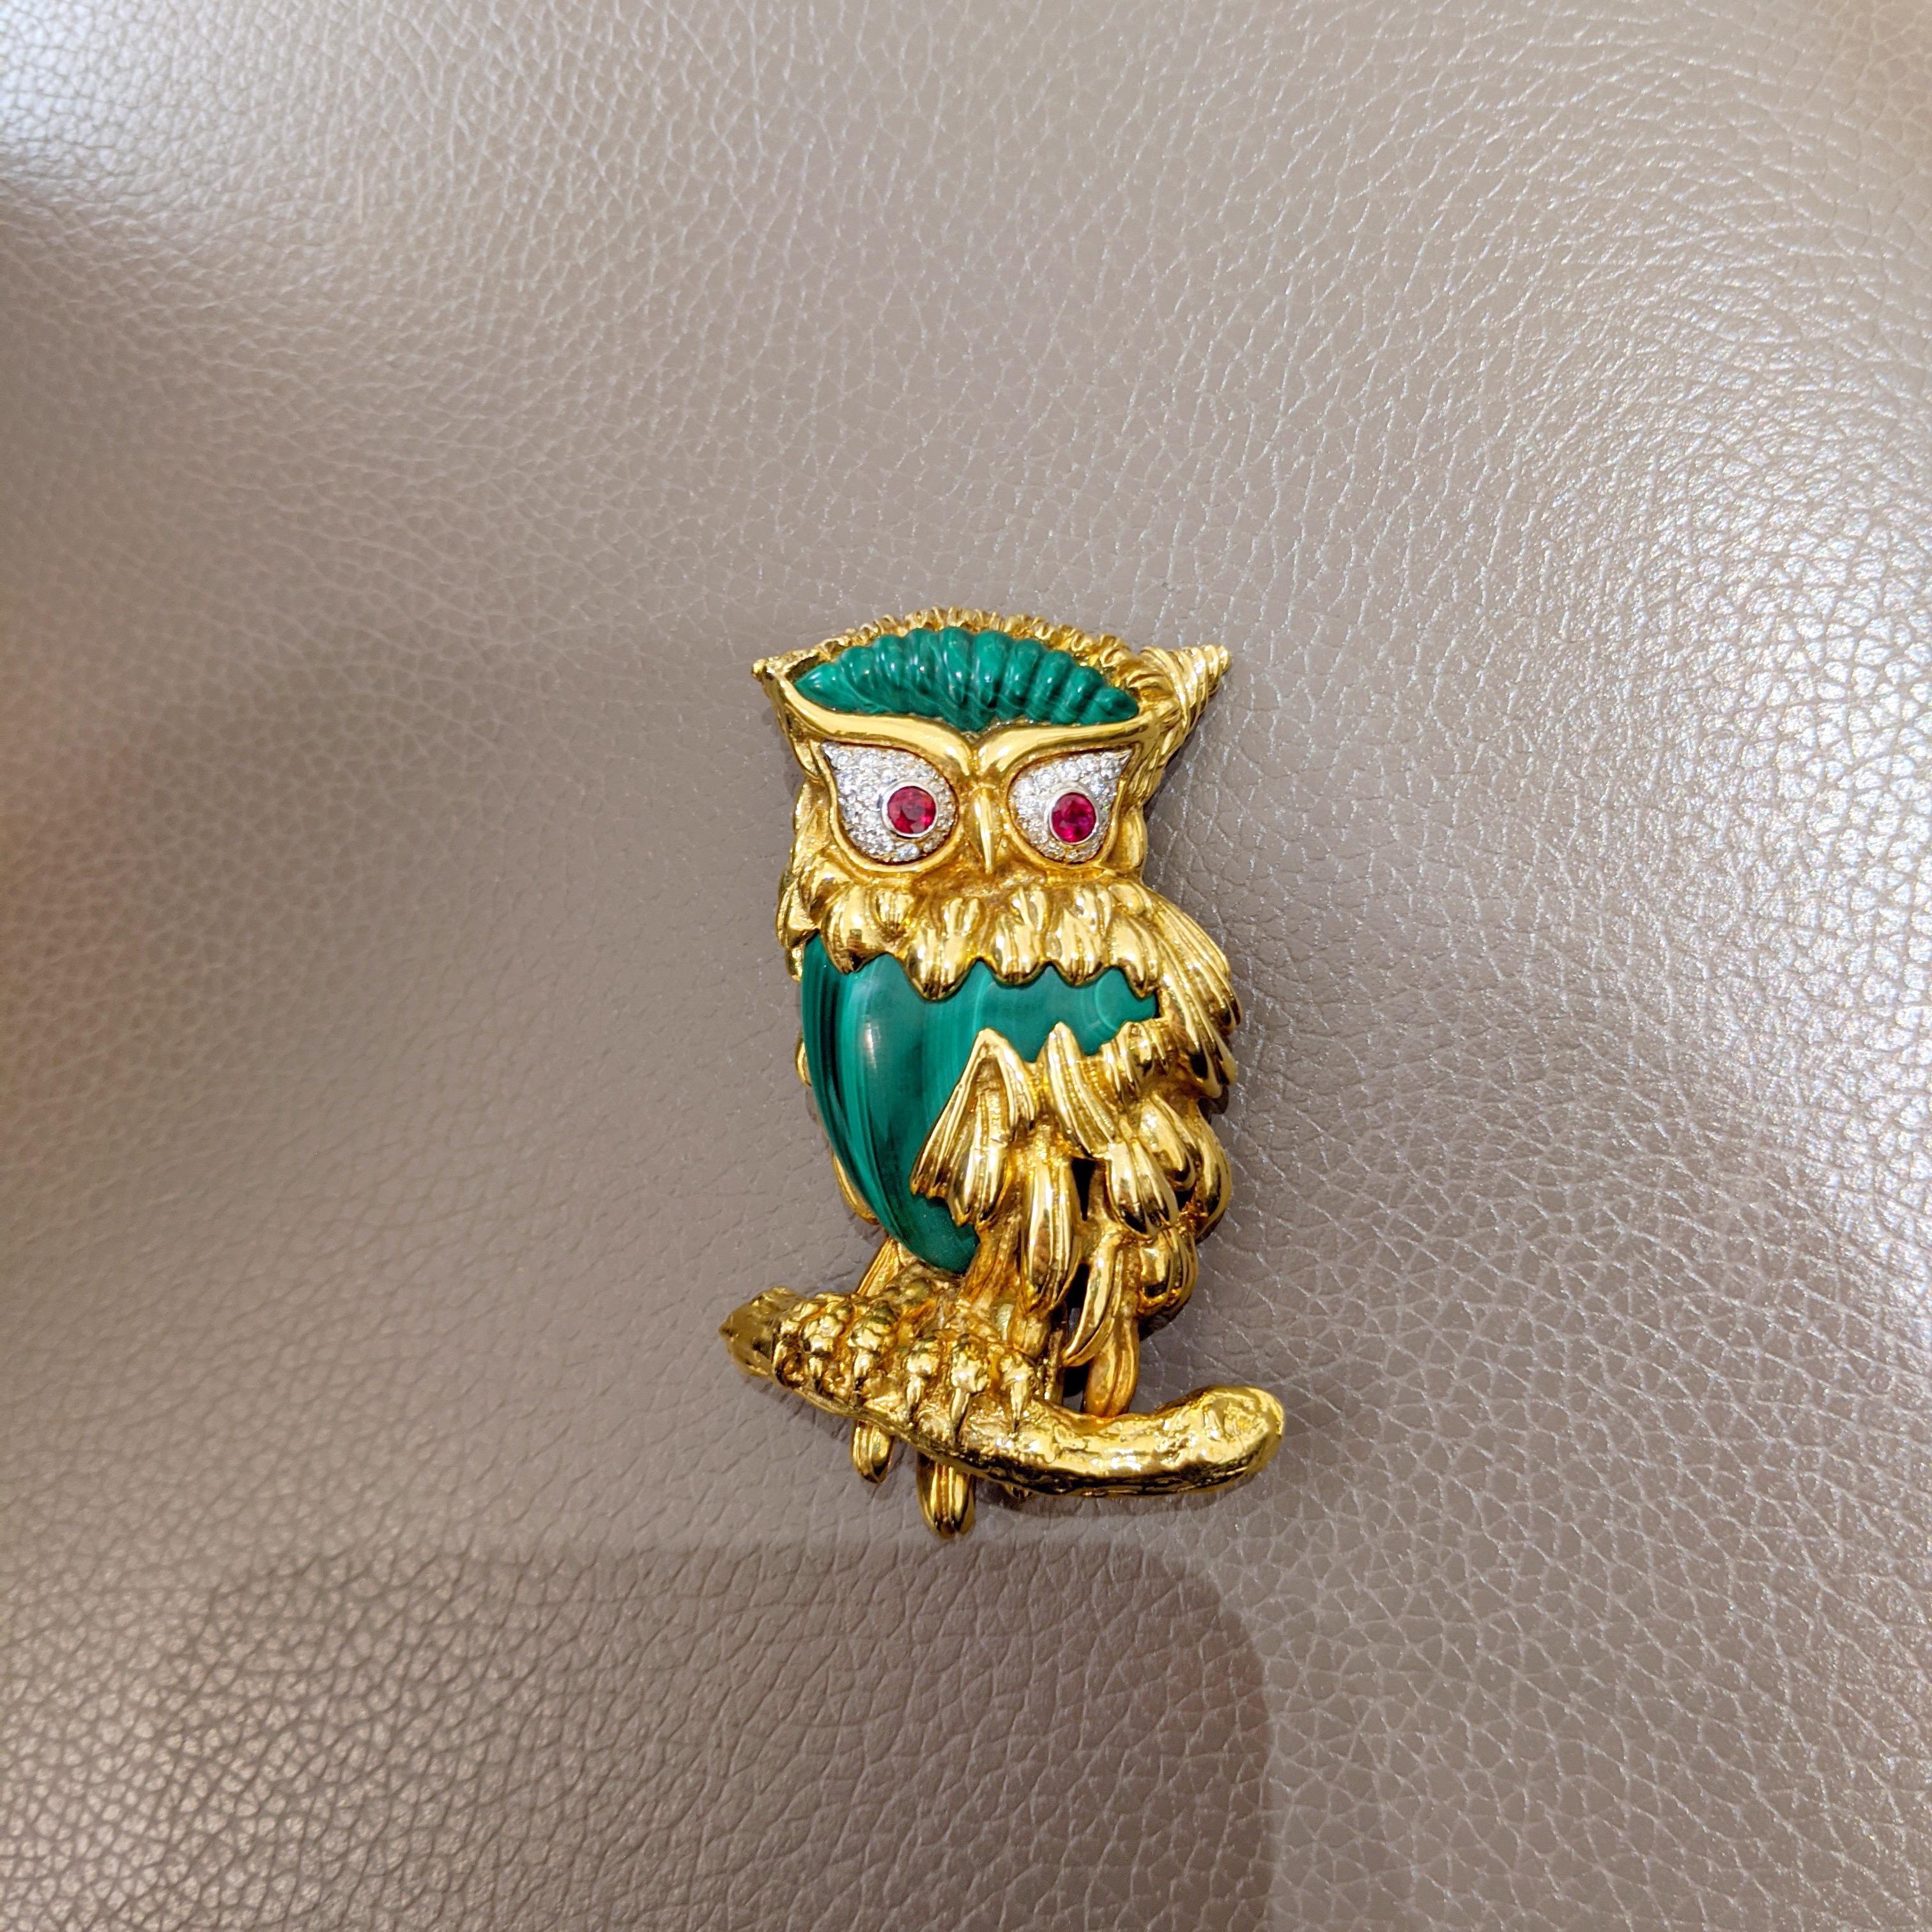 This unique owl brooch is designed by Carrera y Carrera  of Spain. In mythology owls relate to wisdom and femininity. This spectacular brooch is sculpturally  designed with a malachite body, 18 karat yellow gold for the feathers and pave diamond and